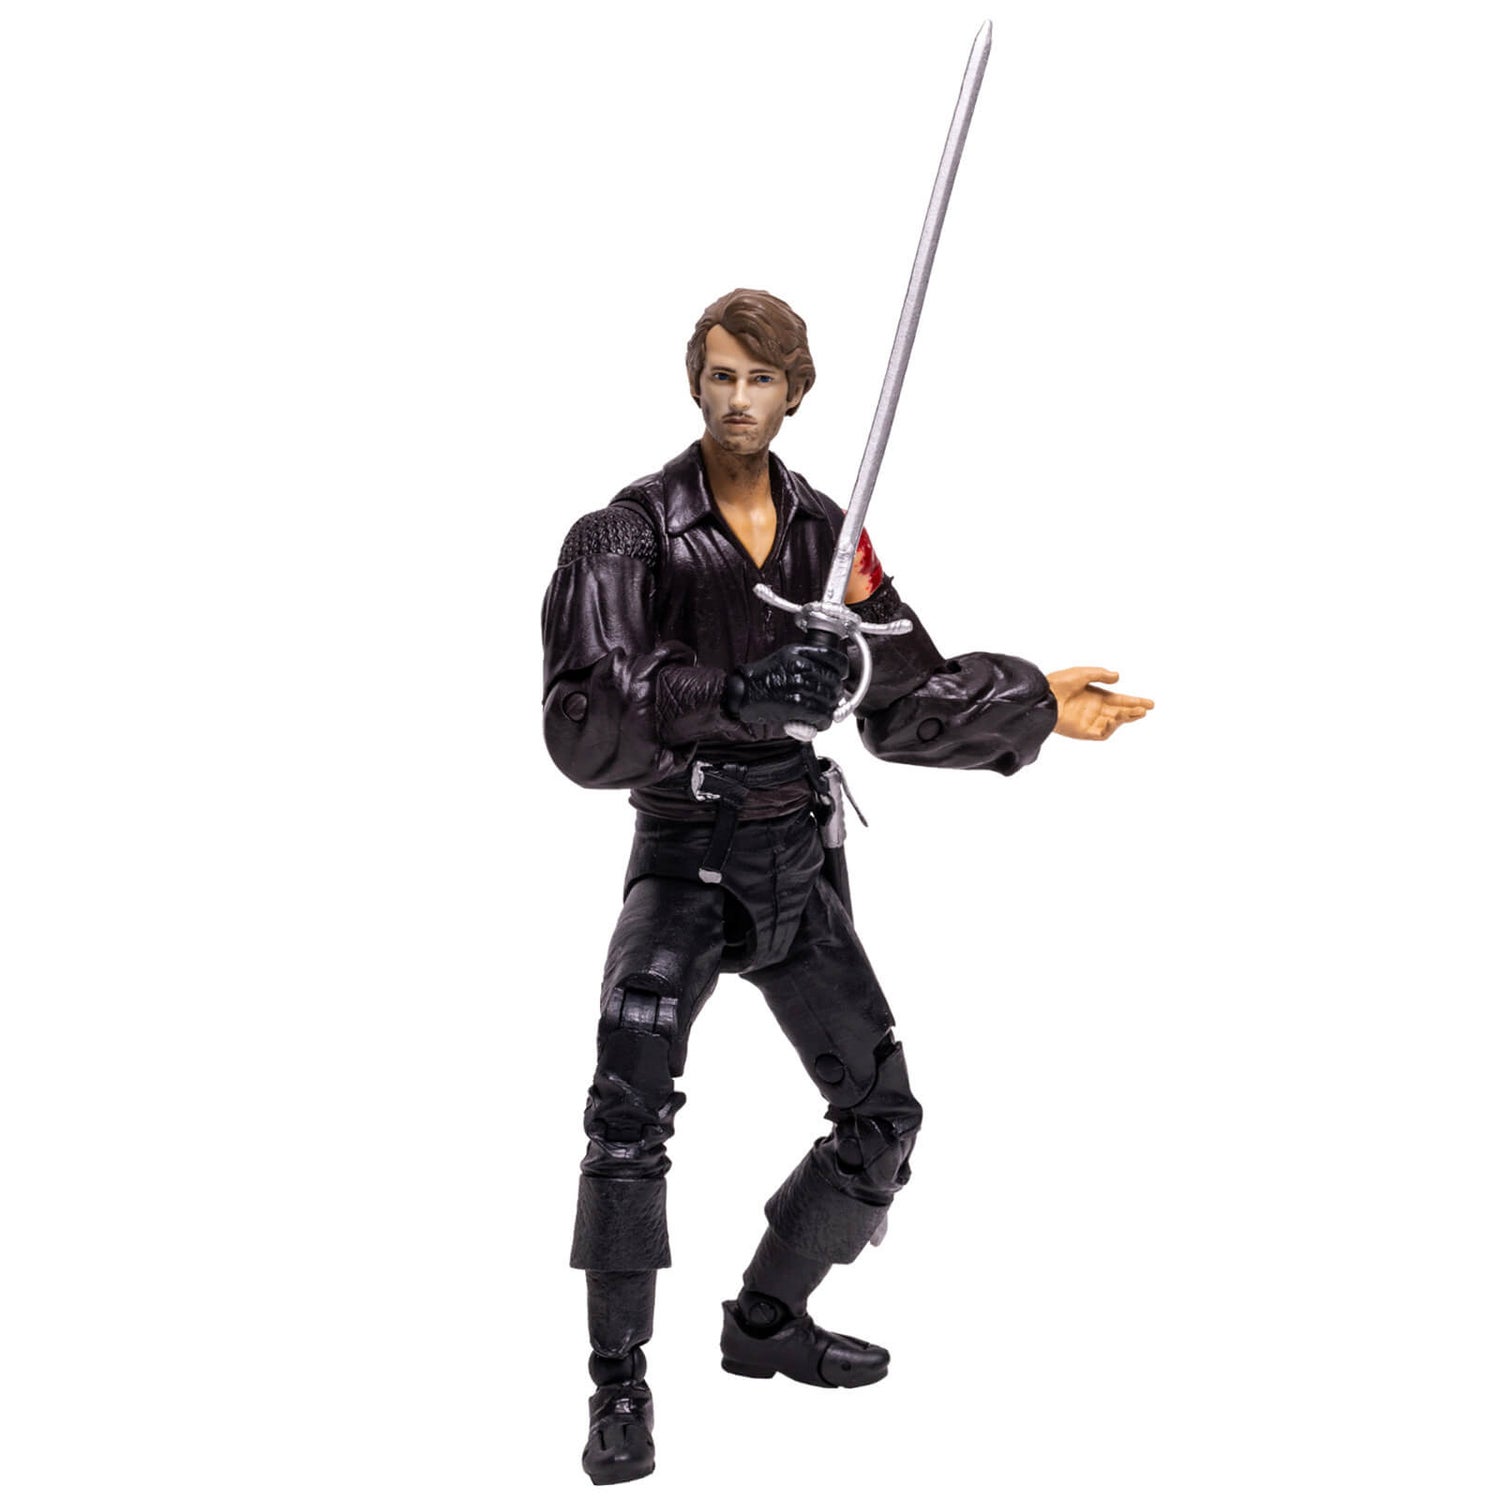 McFarlane The Princess Bride 7" Action Figure - Dread Pirate Roberts (Bloodied)